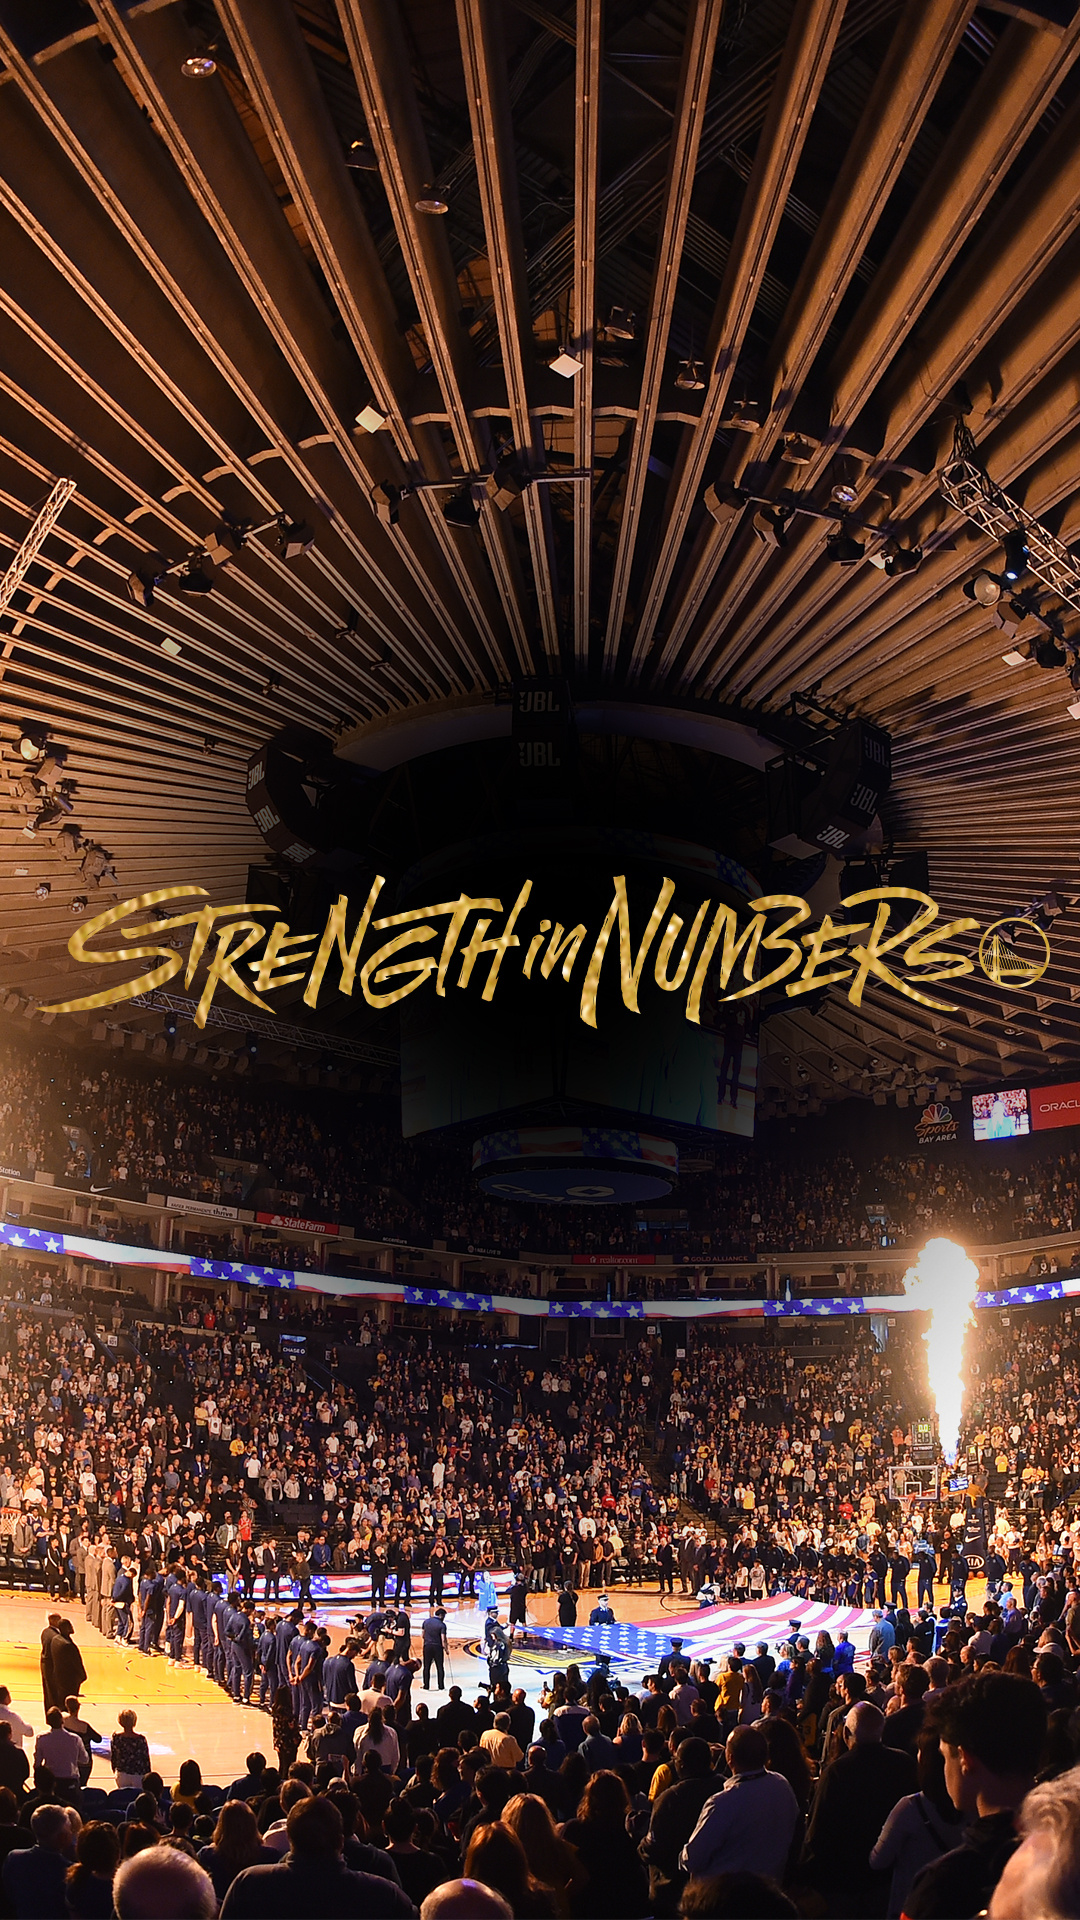 Golden State Warriors: "Strength in Numbers" campaign emphasizes the team's depth and unselfish play. 1080x1920 Full HD Wallpaper.